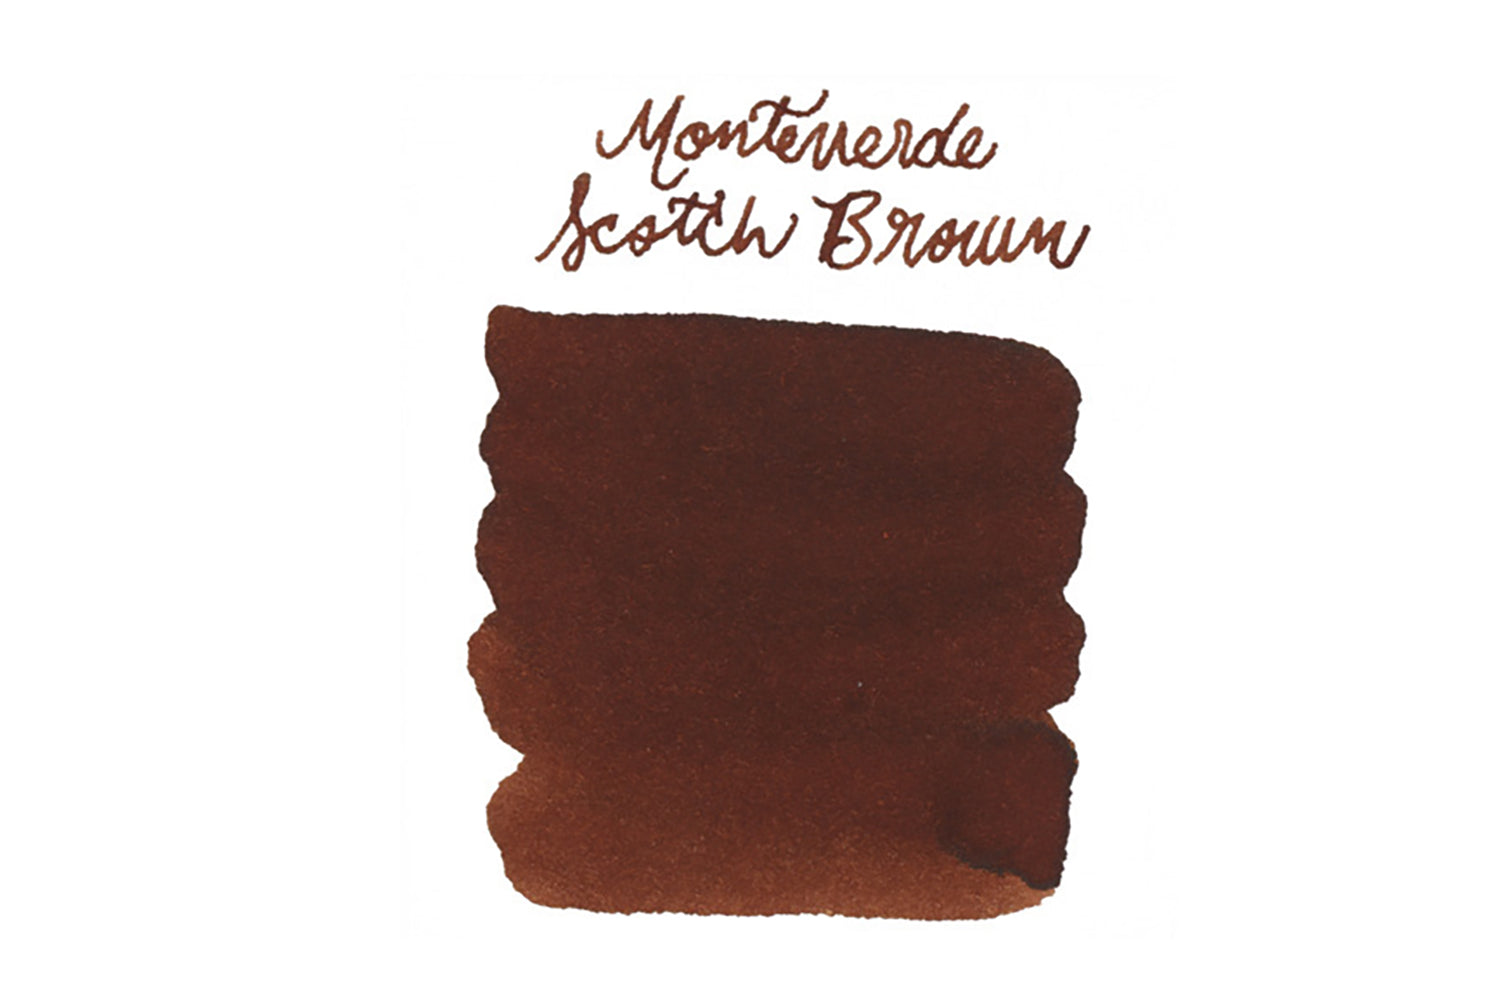 Monteverde Scotch Brown - Ink Sample - The Goulet Pen Company